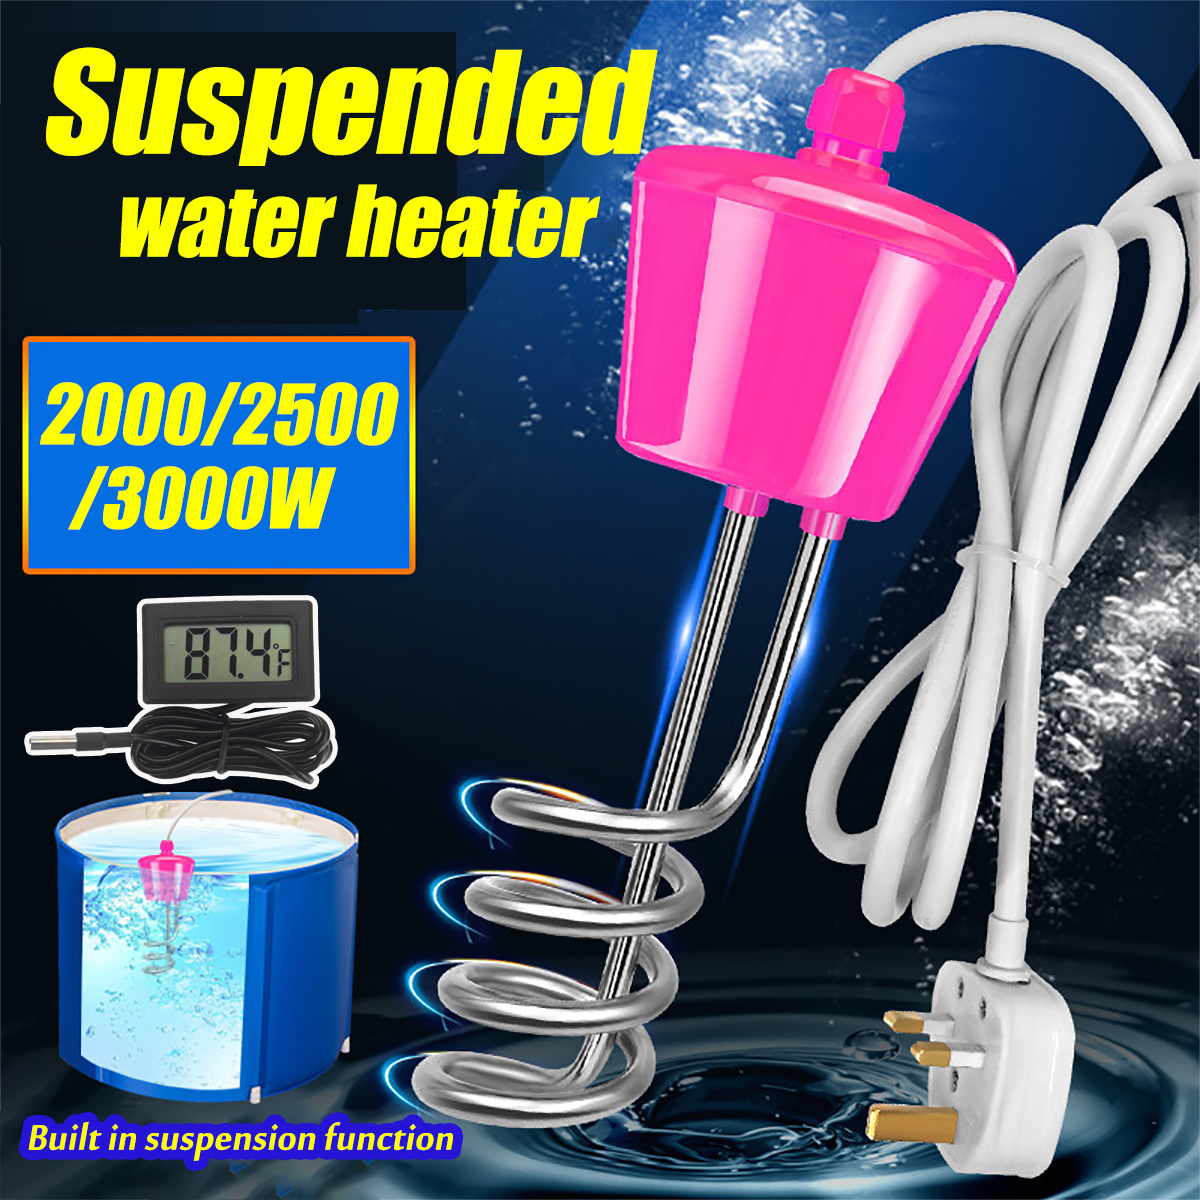 New-3000W-2000W-Bathtub-Pool-Suspension-Float-Water-Heater-With-Thermometer-1711425-1